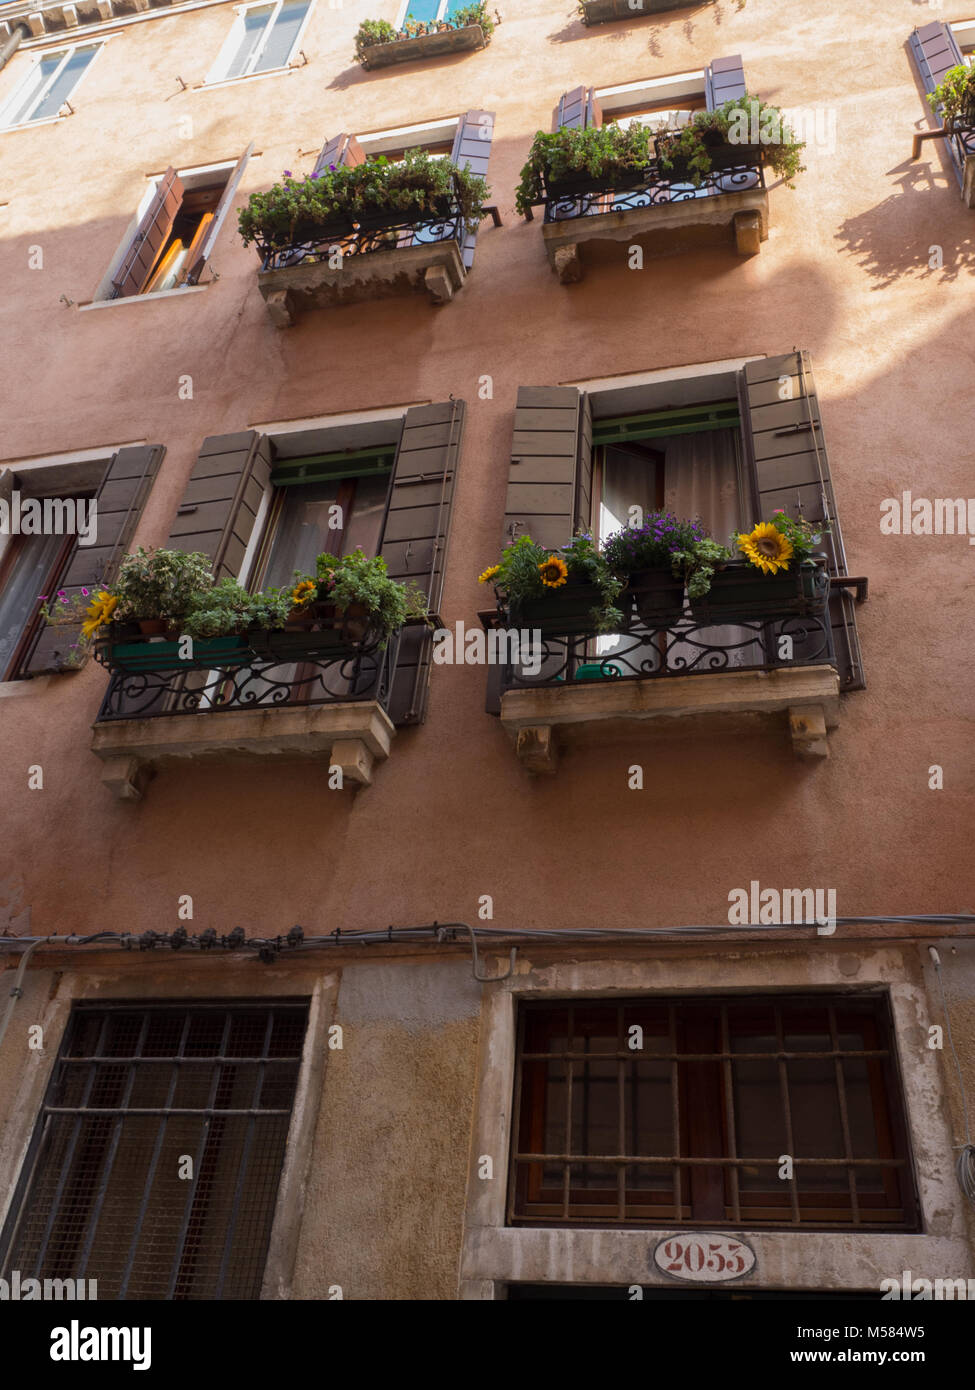 Venetian building with multiple windows and flower boxes Stock Photo